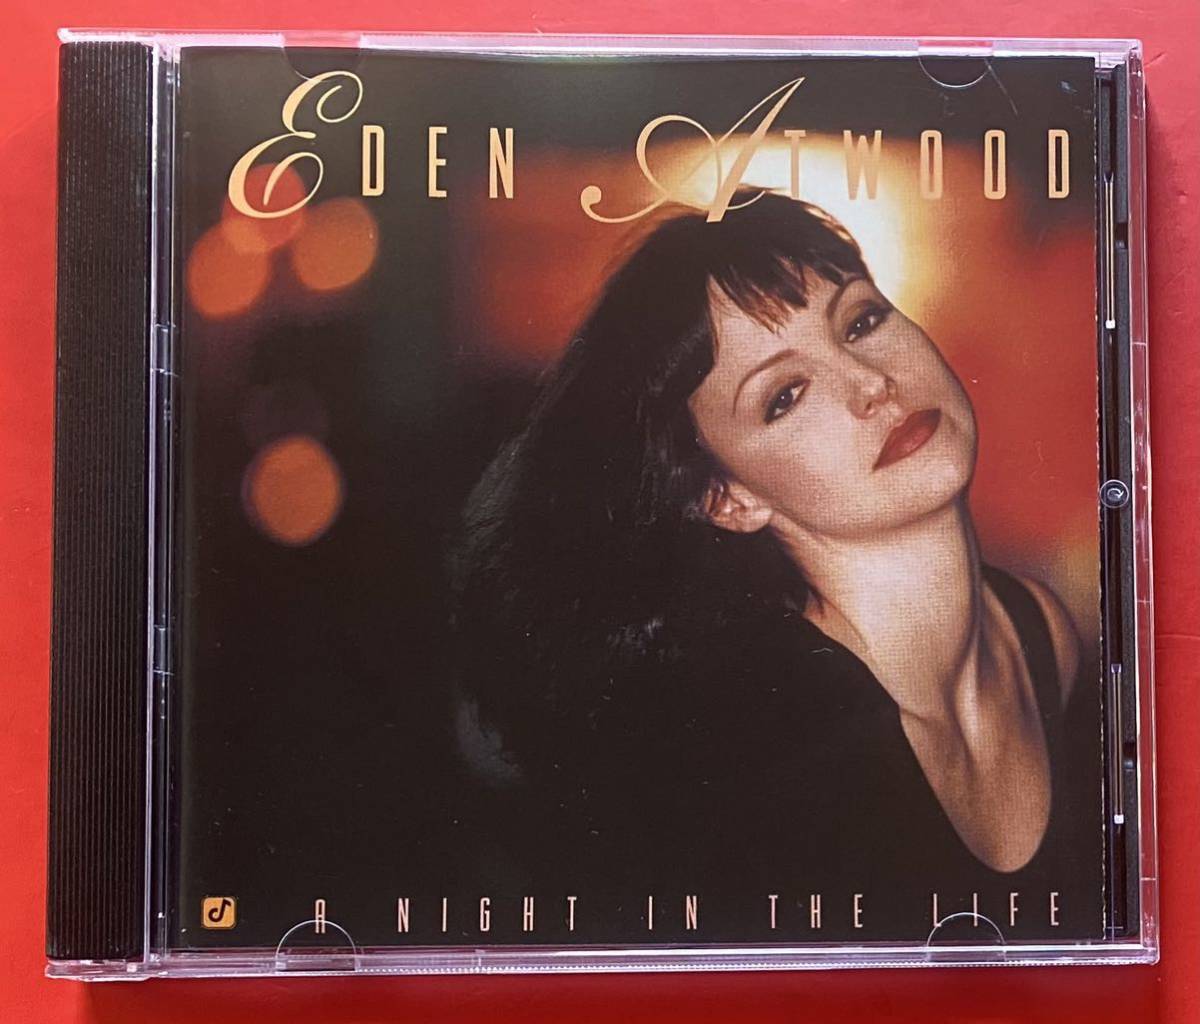 【CD】EDEN ATWOOD「A NIGHT IN THE LIFE」イーデン・アトウッド 輸入盤 [06220147]の画像1